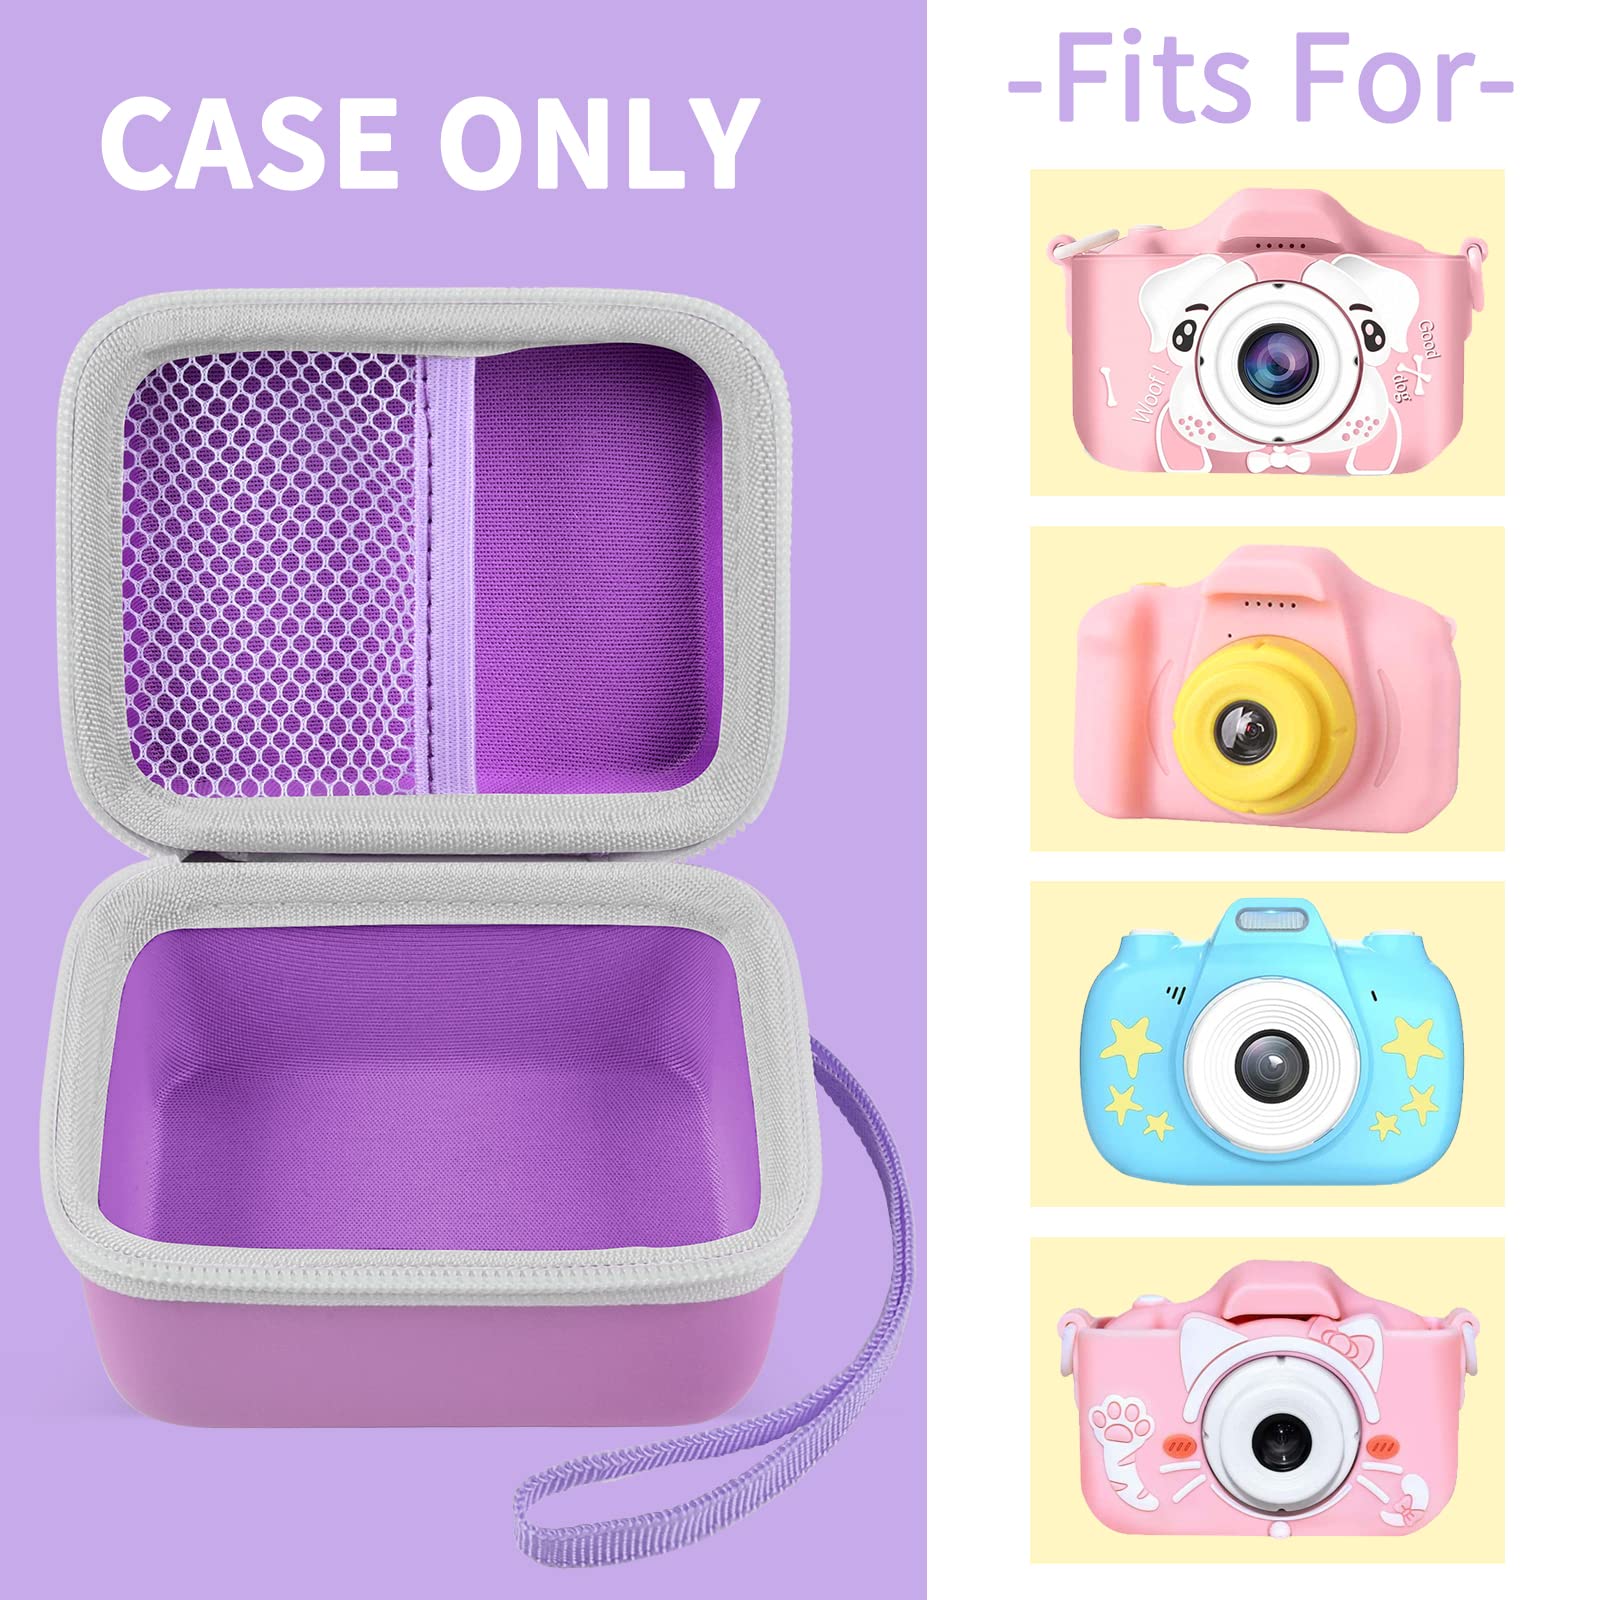 ANKHOH Camera Case for Seckton/for Desuccus/for PROGRACE/for Rindol/for GKTZ/for Dylanto/for GPOSY/for OZMI Kids Digital Camera, Kid Camcorder Storage Box Cable Accessory-Bag Only, Light Purple